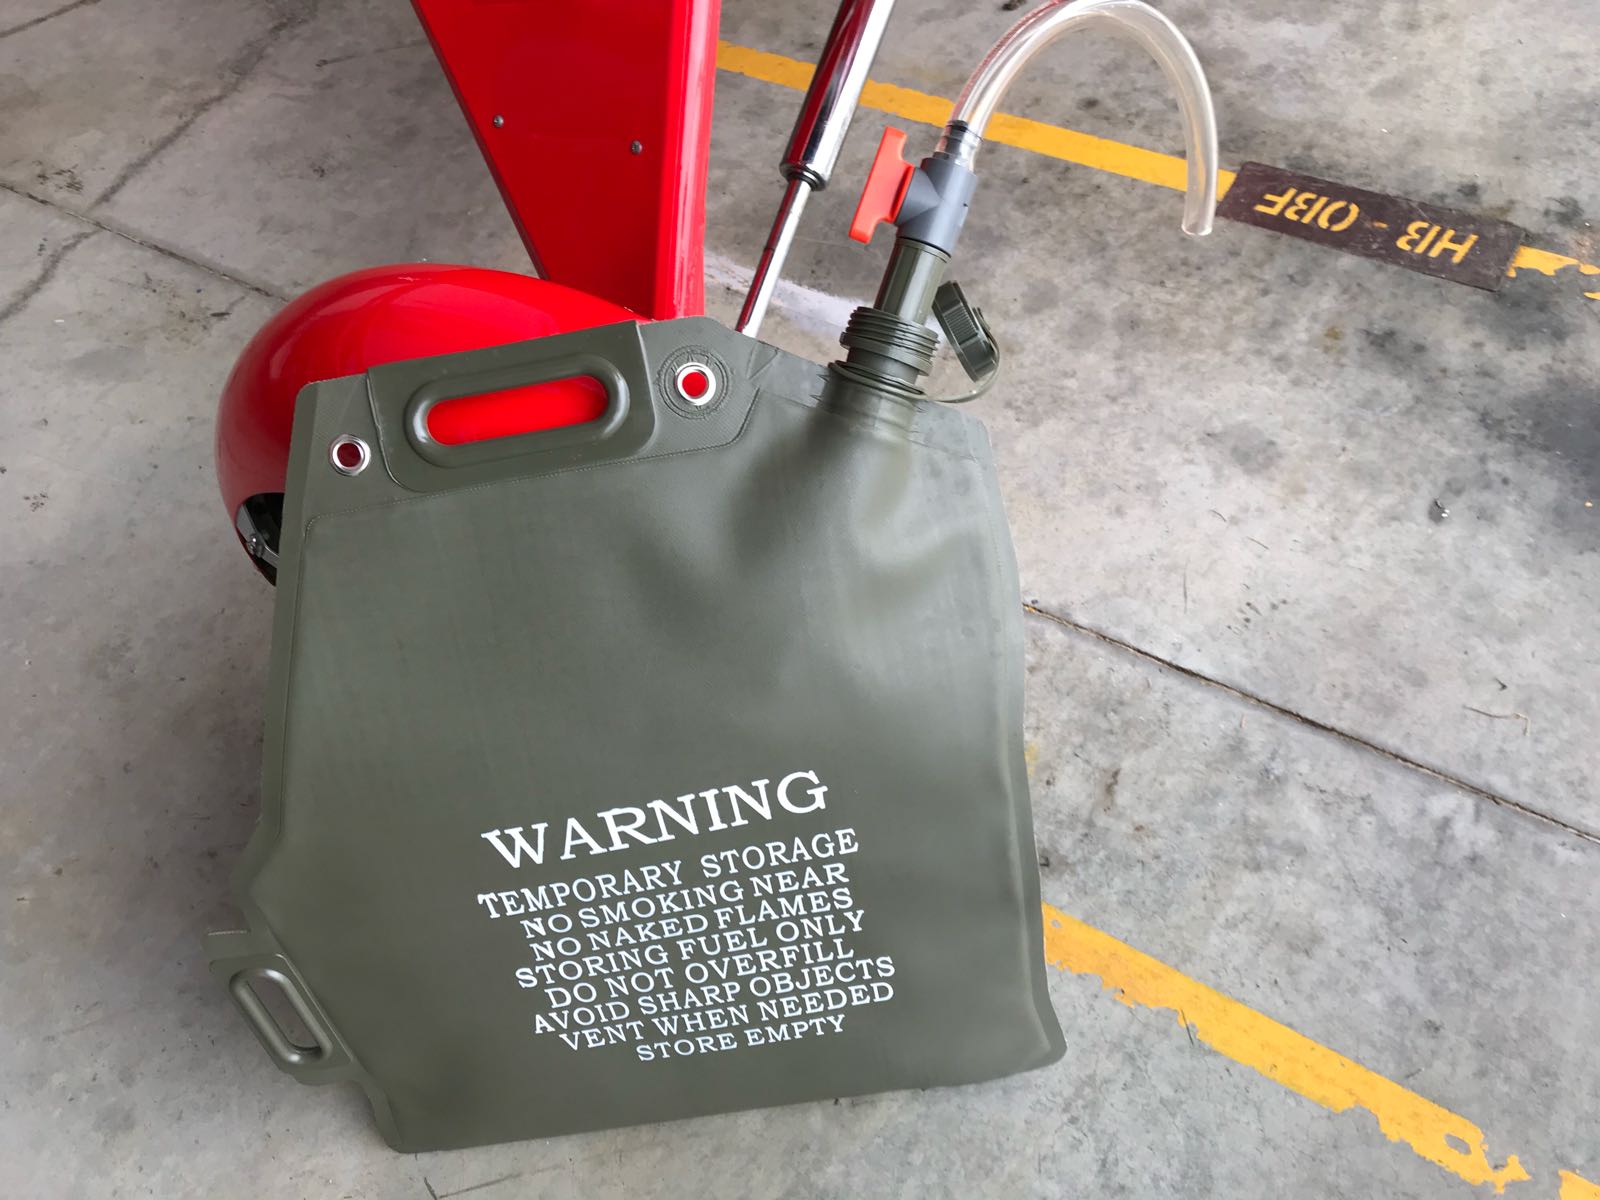 Flexible Diesel Container 5 Gallon For Aeroplane Adventure Plastic Gas Can 20 Litre Supplier